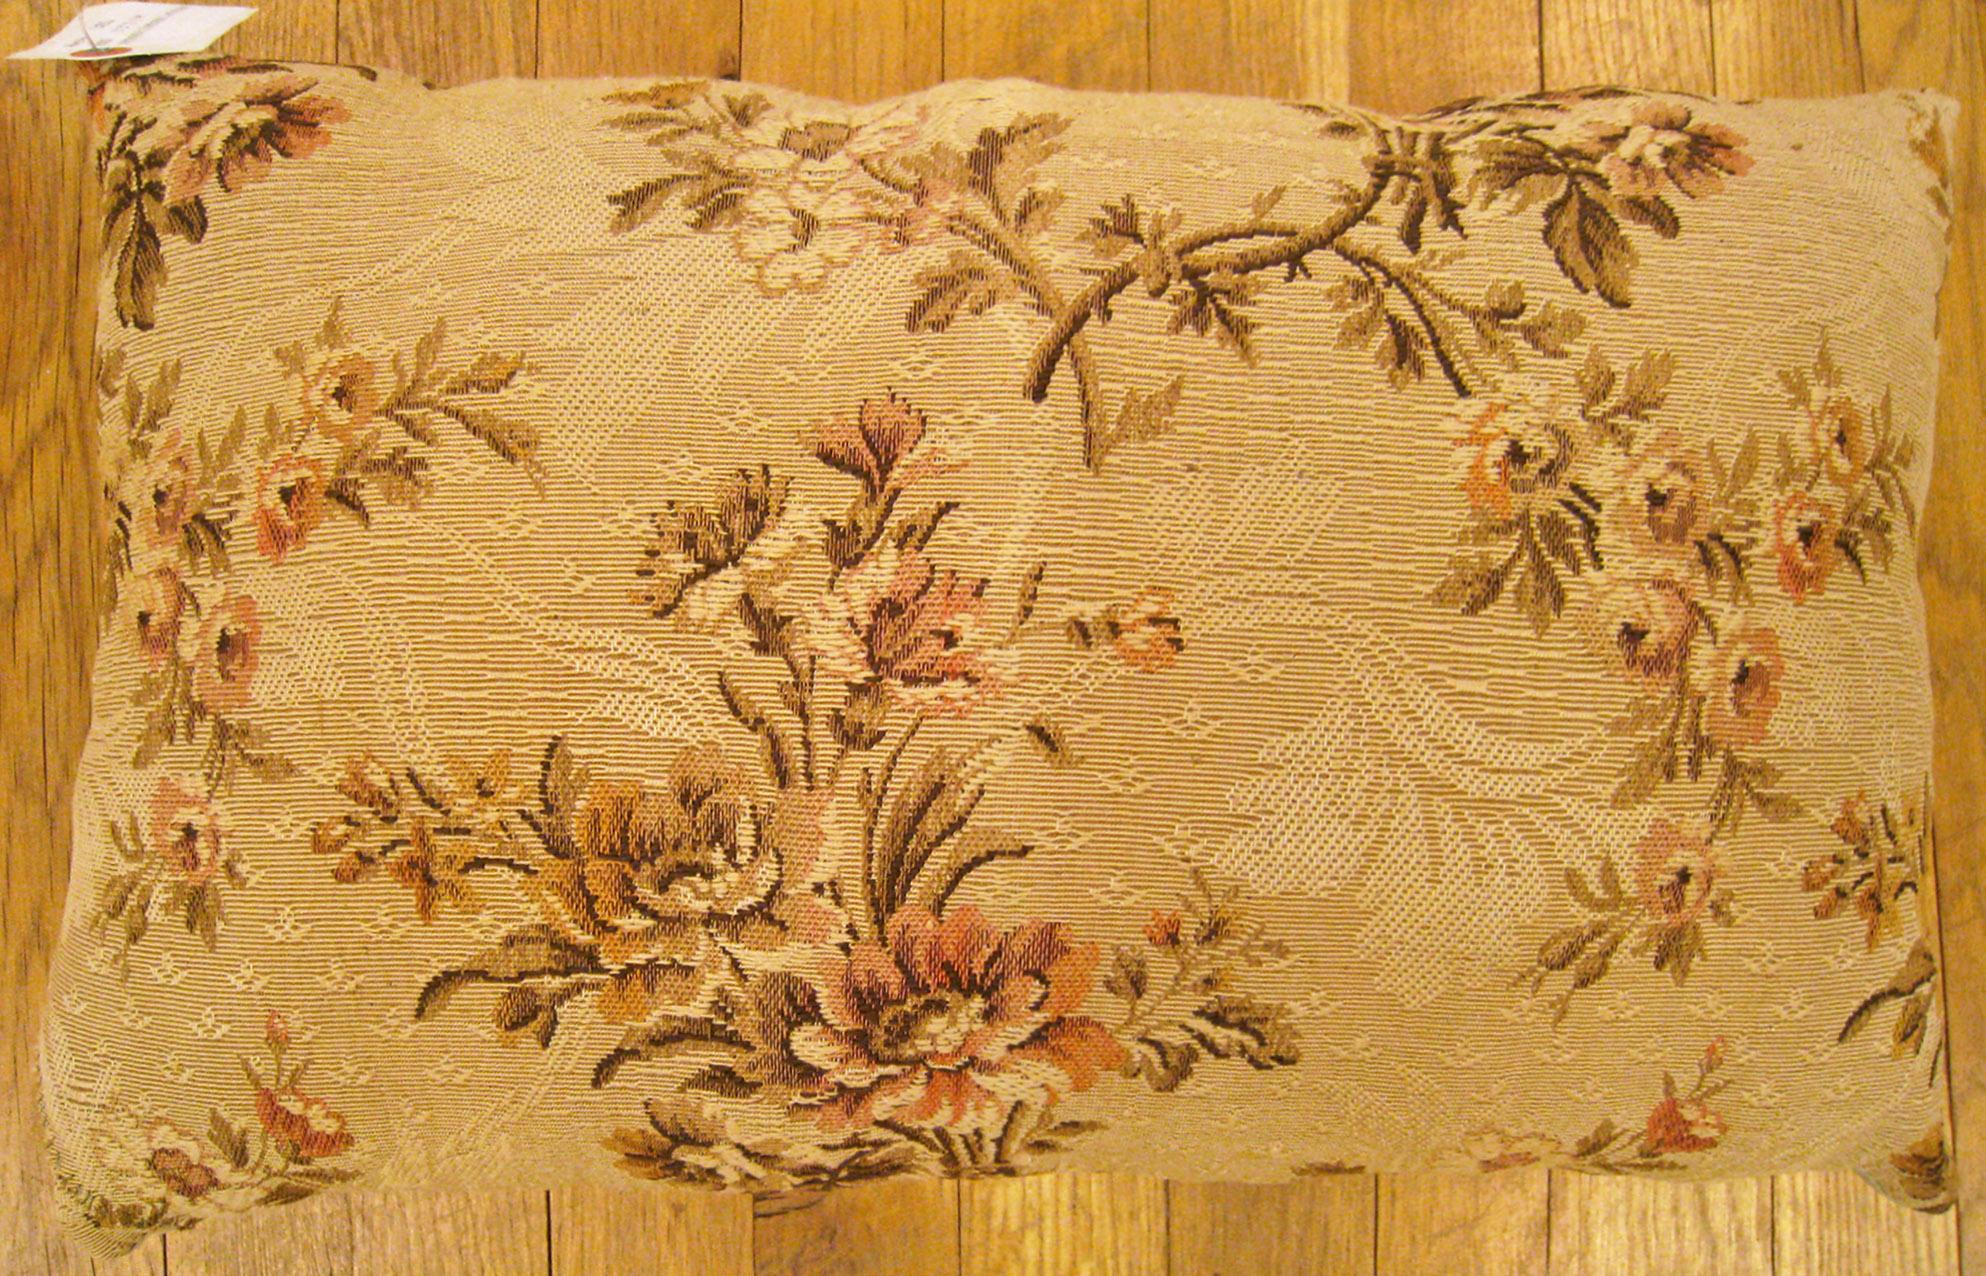 Antique jacquard tapestry pillow; size 1'2” x 1'9”.

An antique decorative pillow with floral elements allover a dusty rose central field, size 1'2